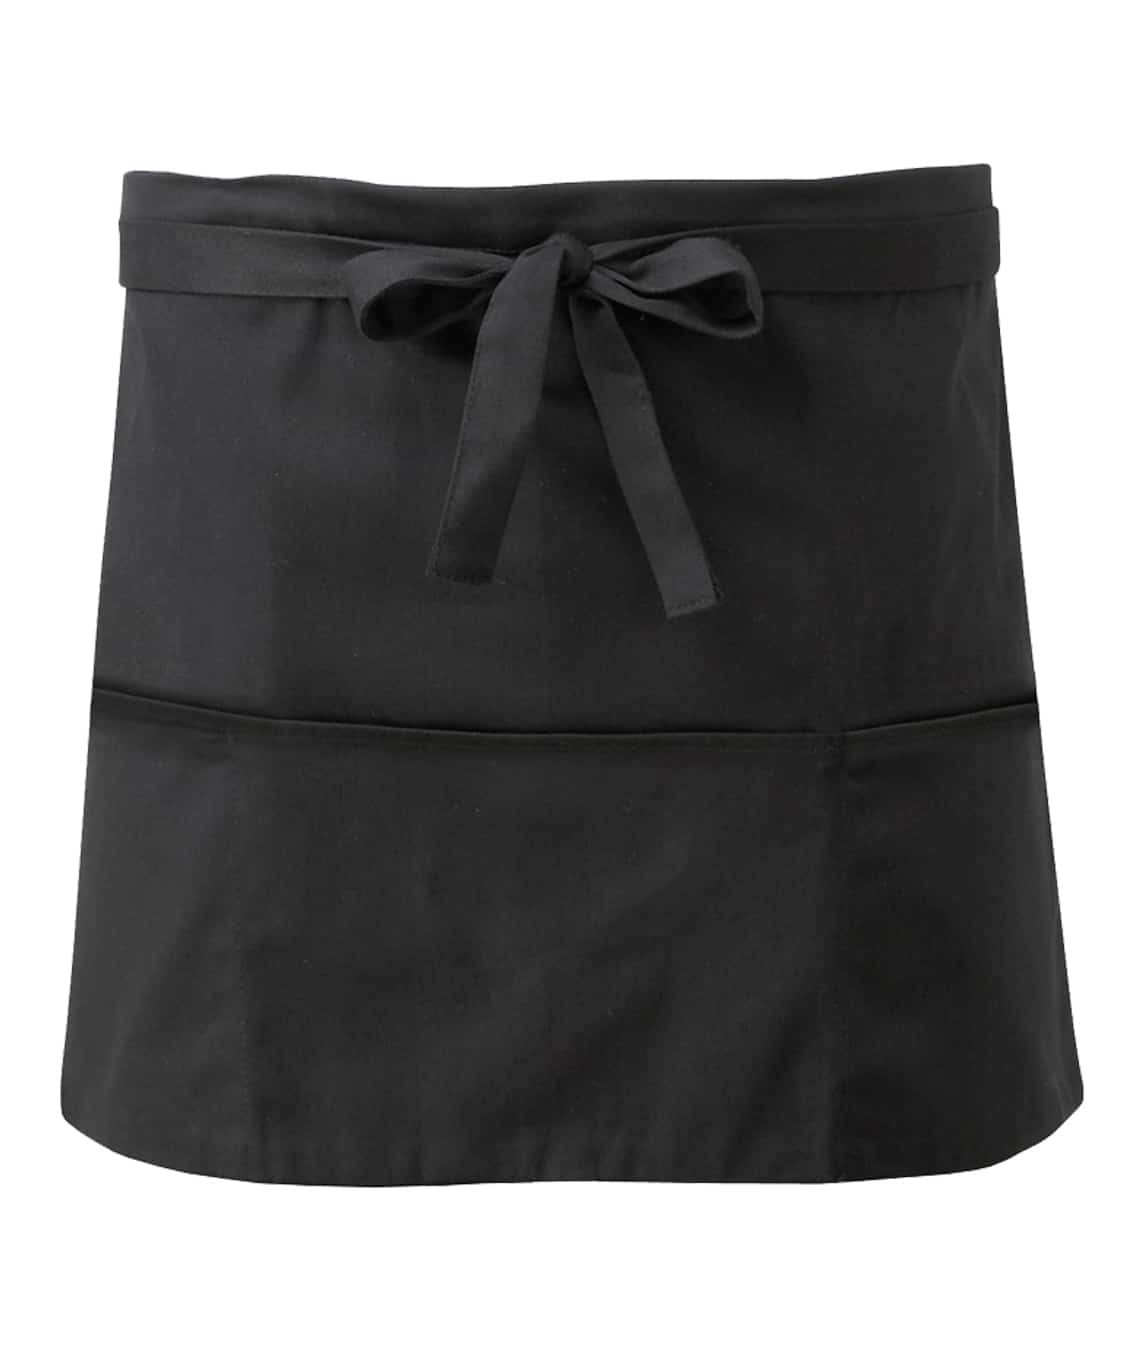 Short Apron: Unisex With Open Pockets